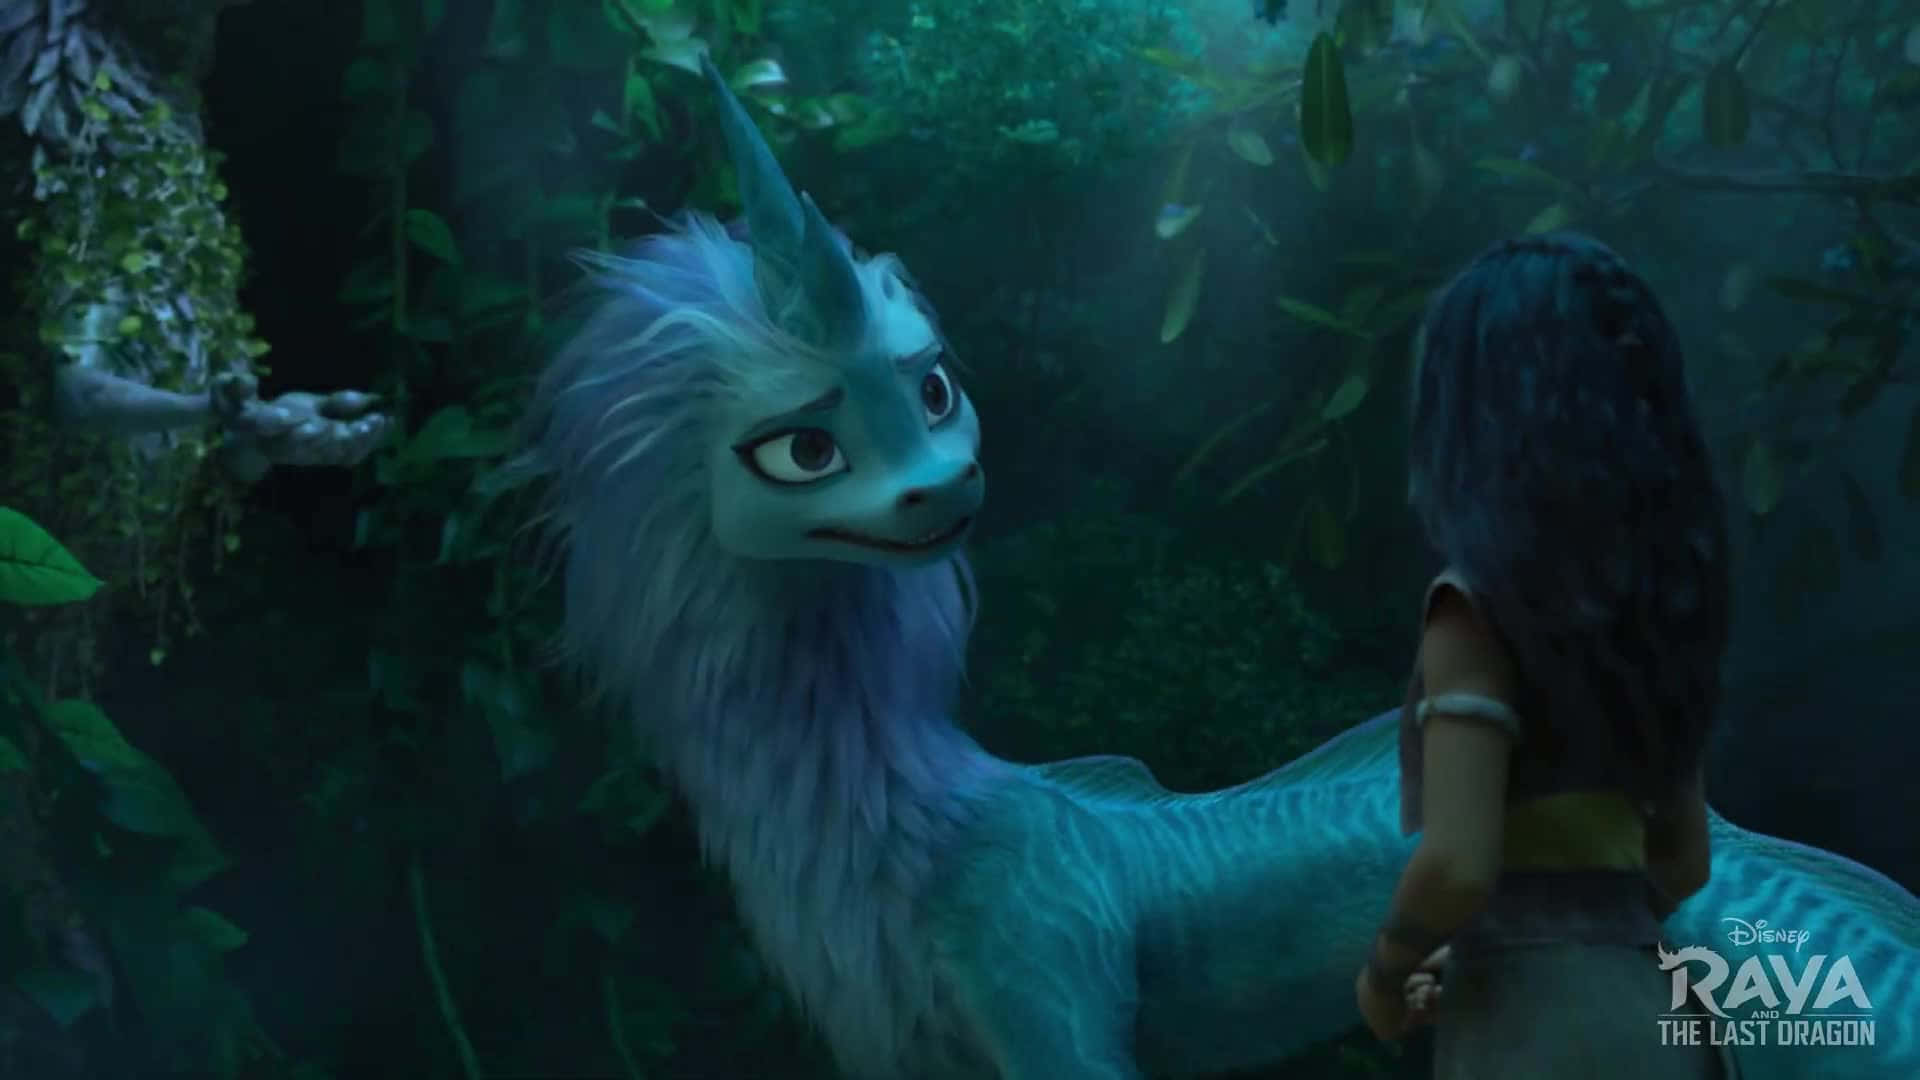 A Girl Is Standing Next To A Blue Dragon In The Jungle